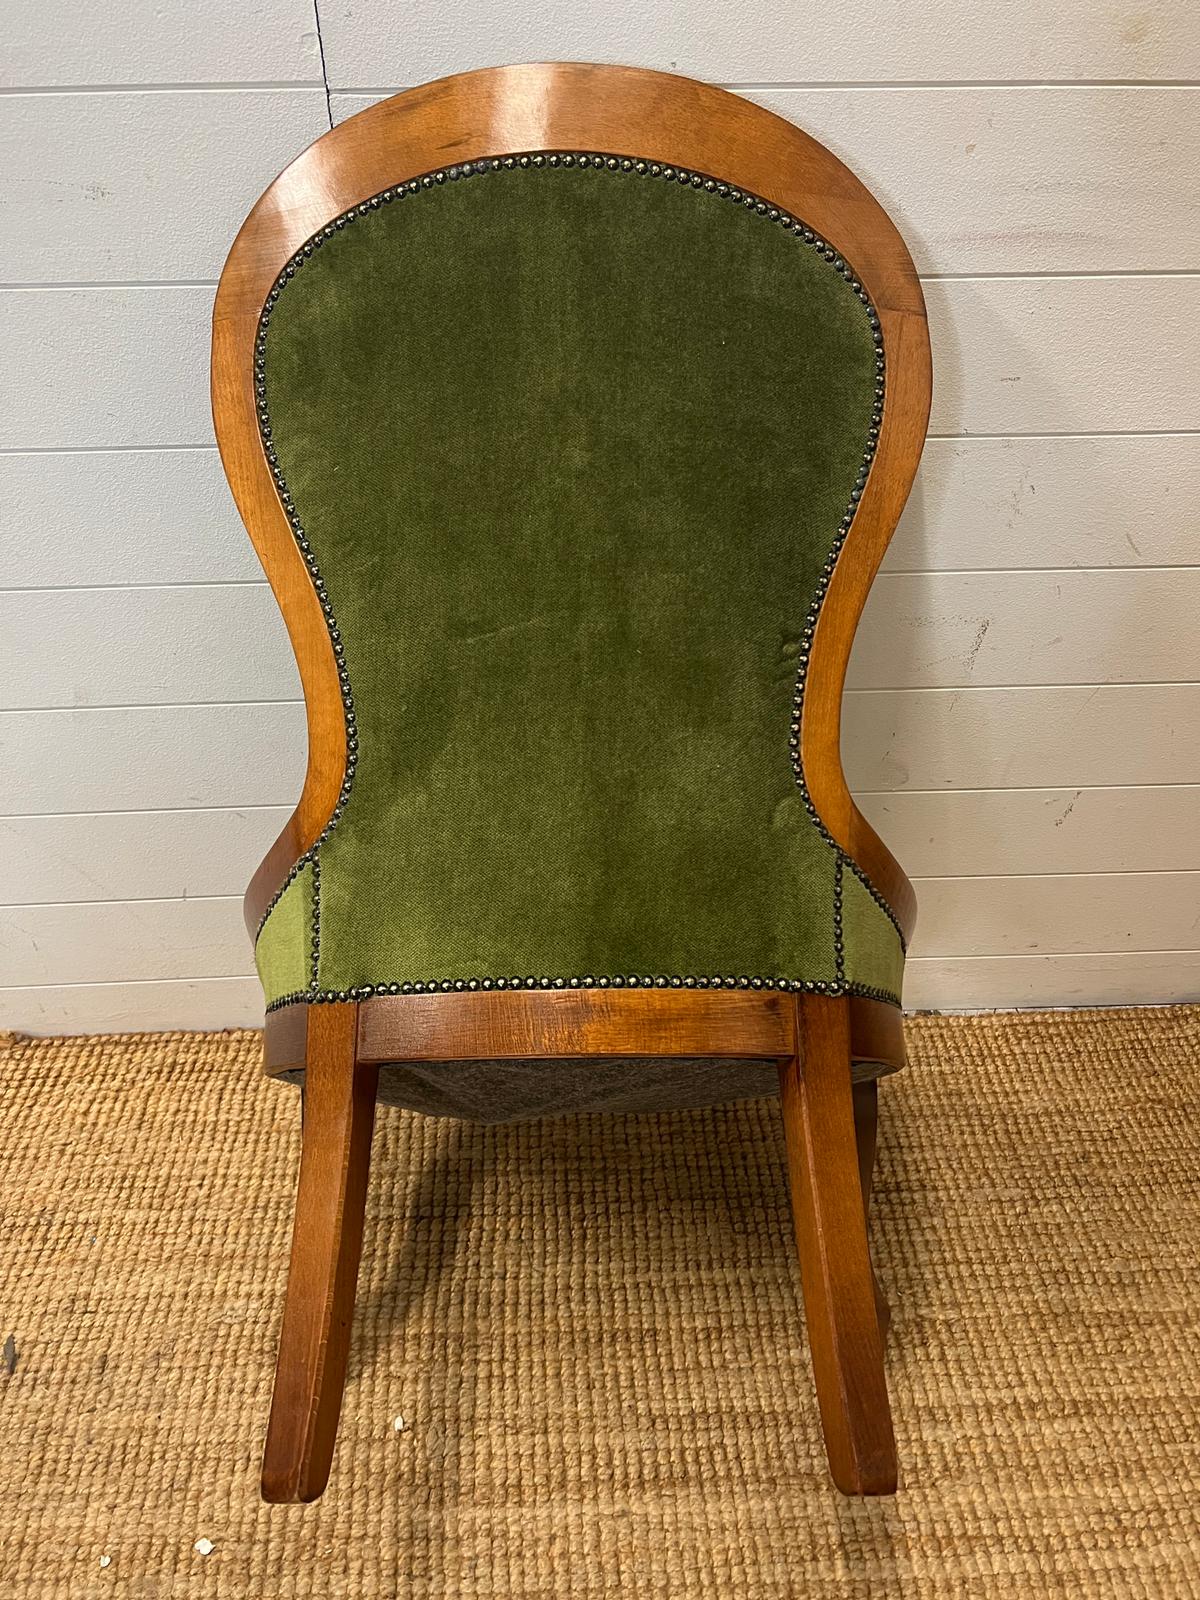 A Victorian mahogany frame chair - Image 3 of 5